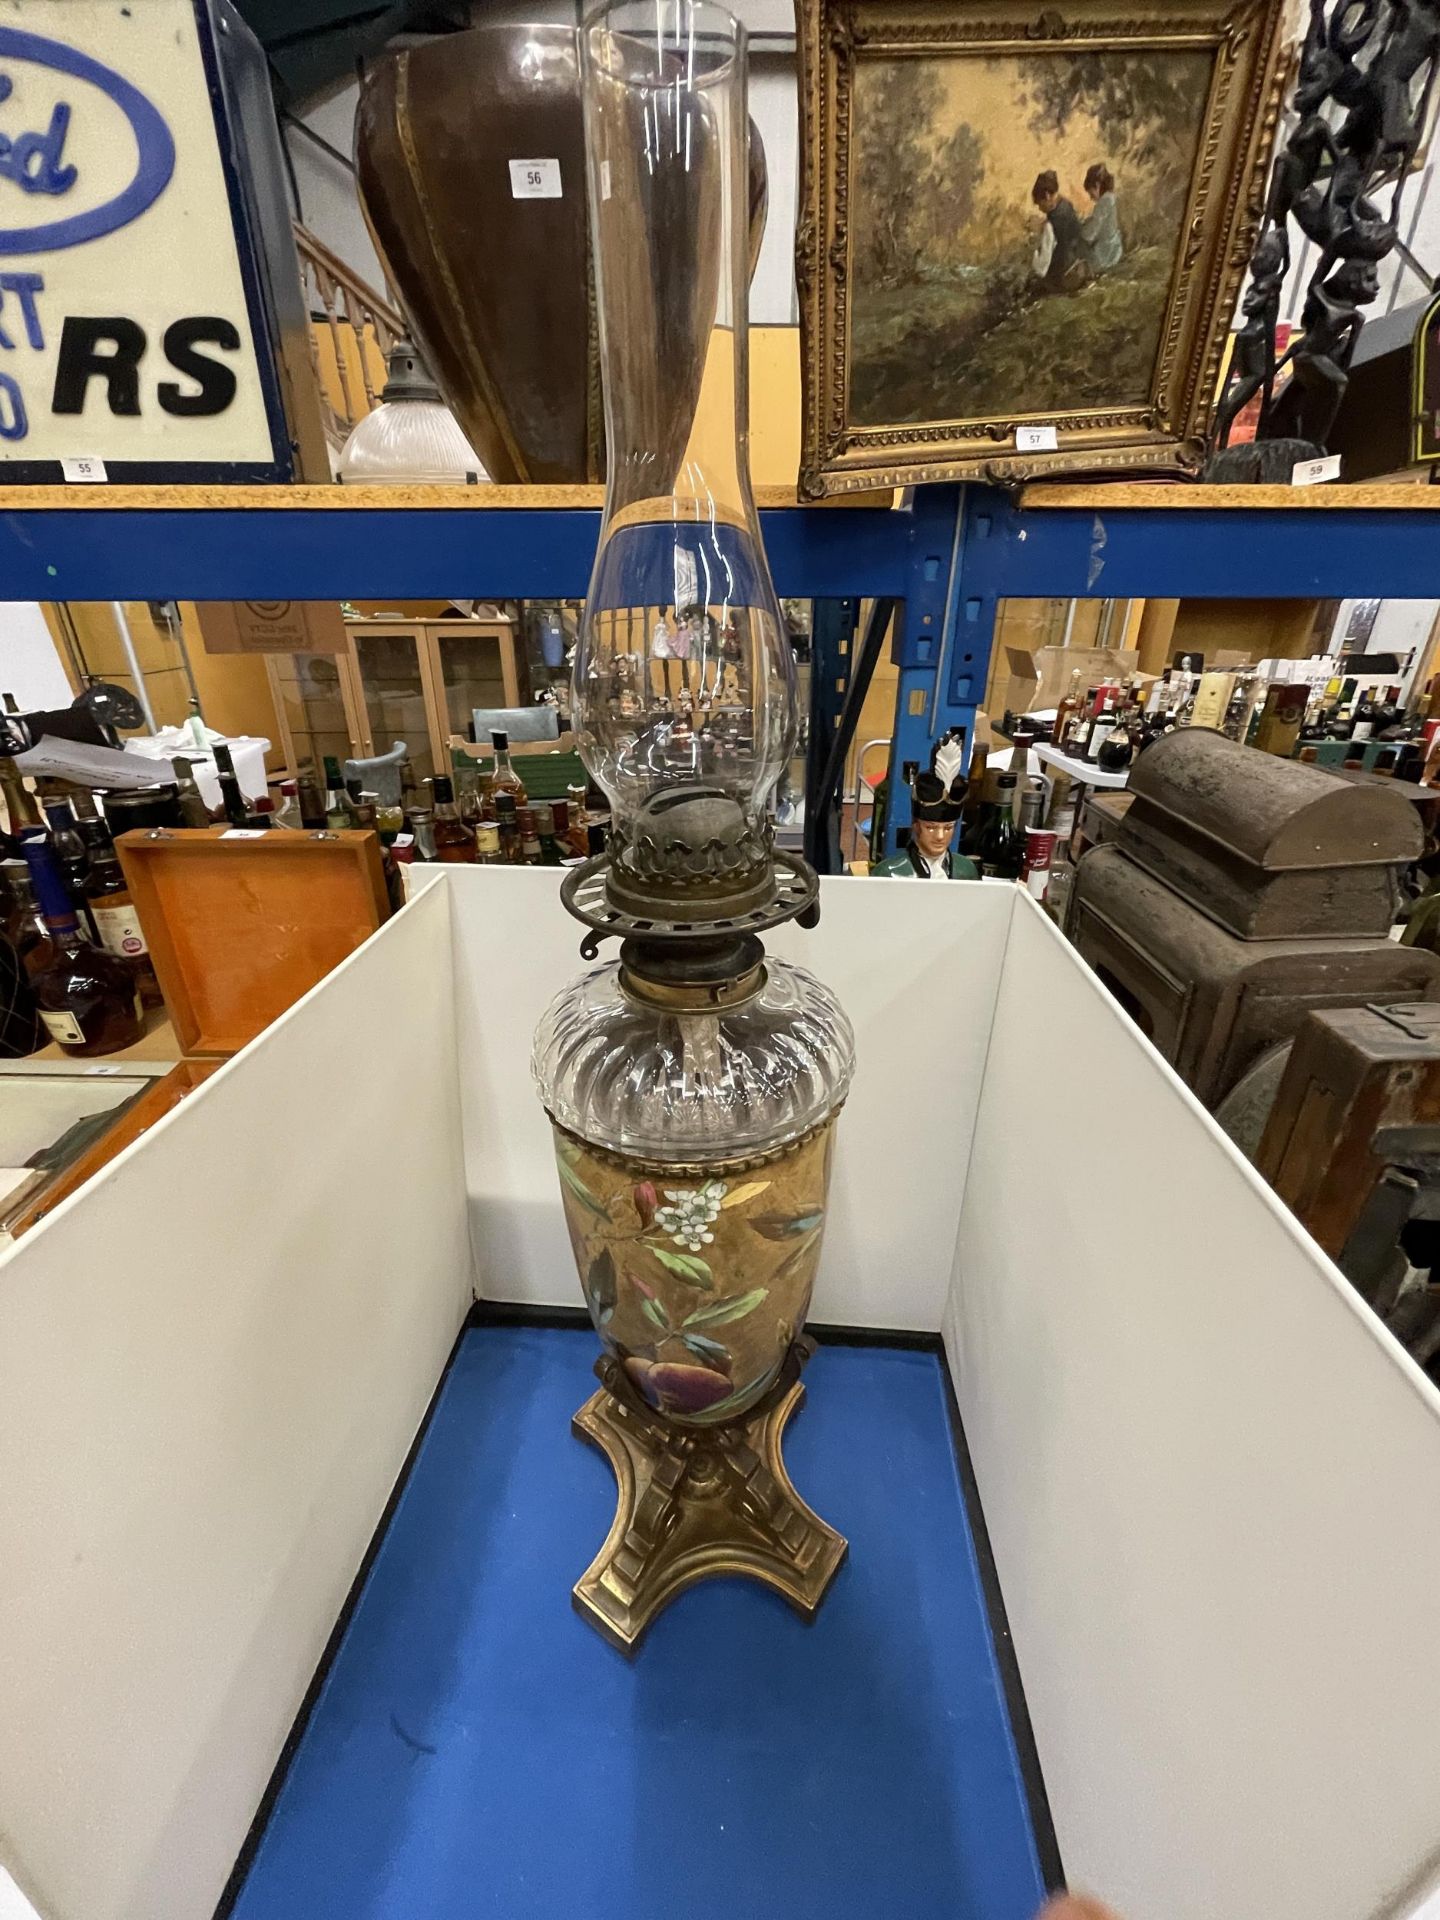 AN ORNATE VICTORIAN OIL LAMP WITH GLASS FUNNEL